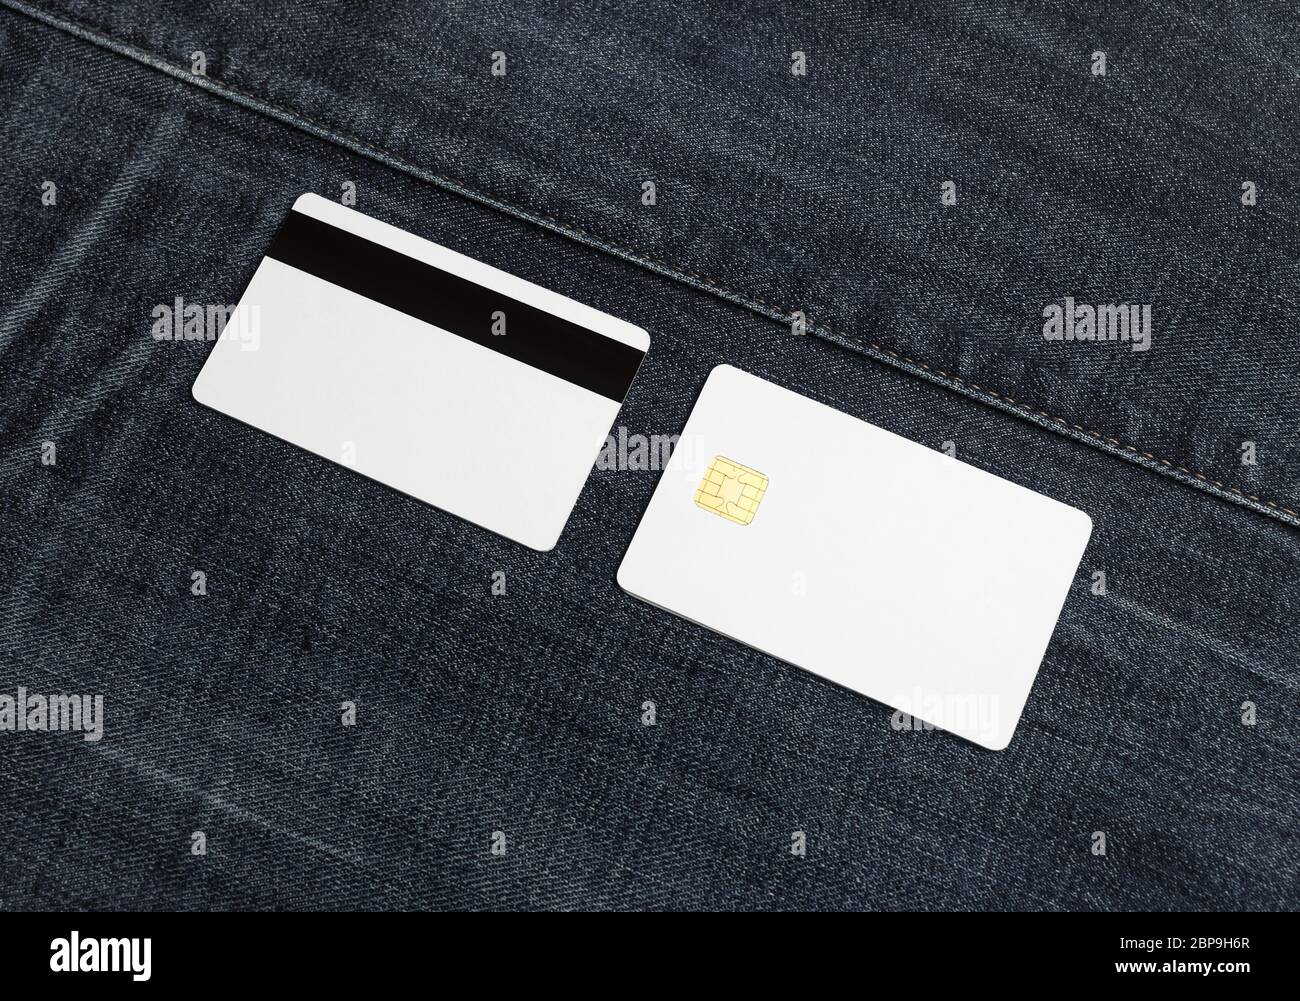 Blank bank cards on denim background. Credit cards. Front and back view. Stock Photo